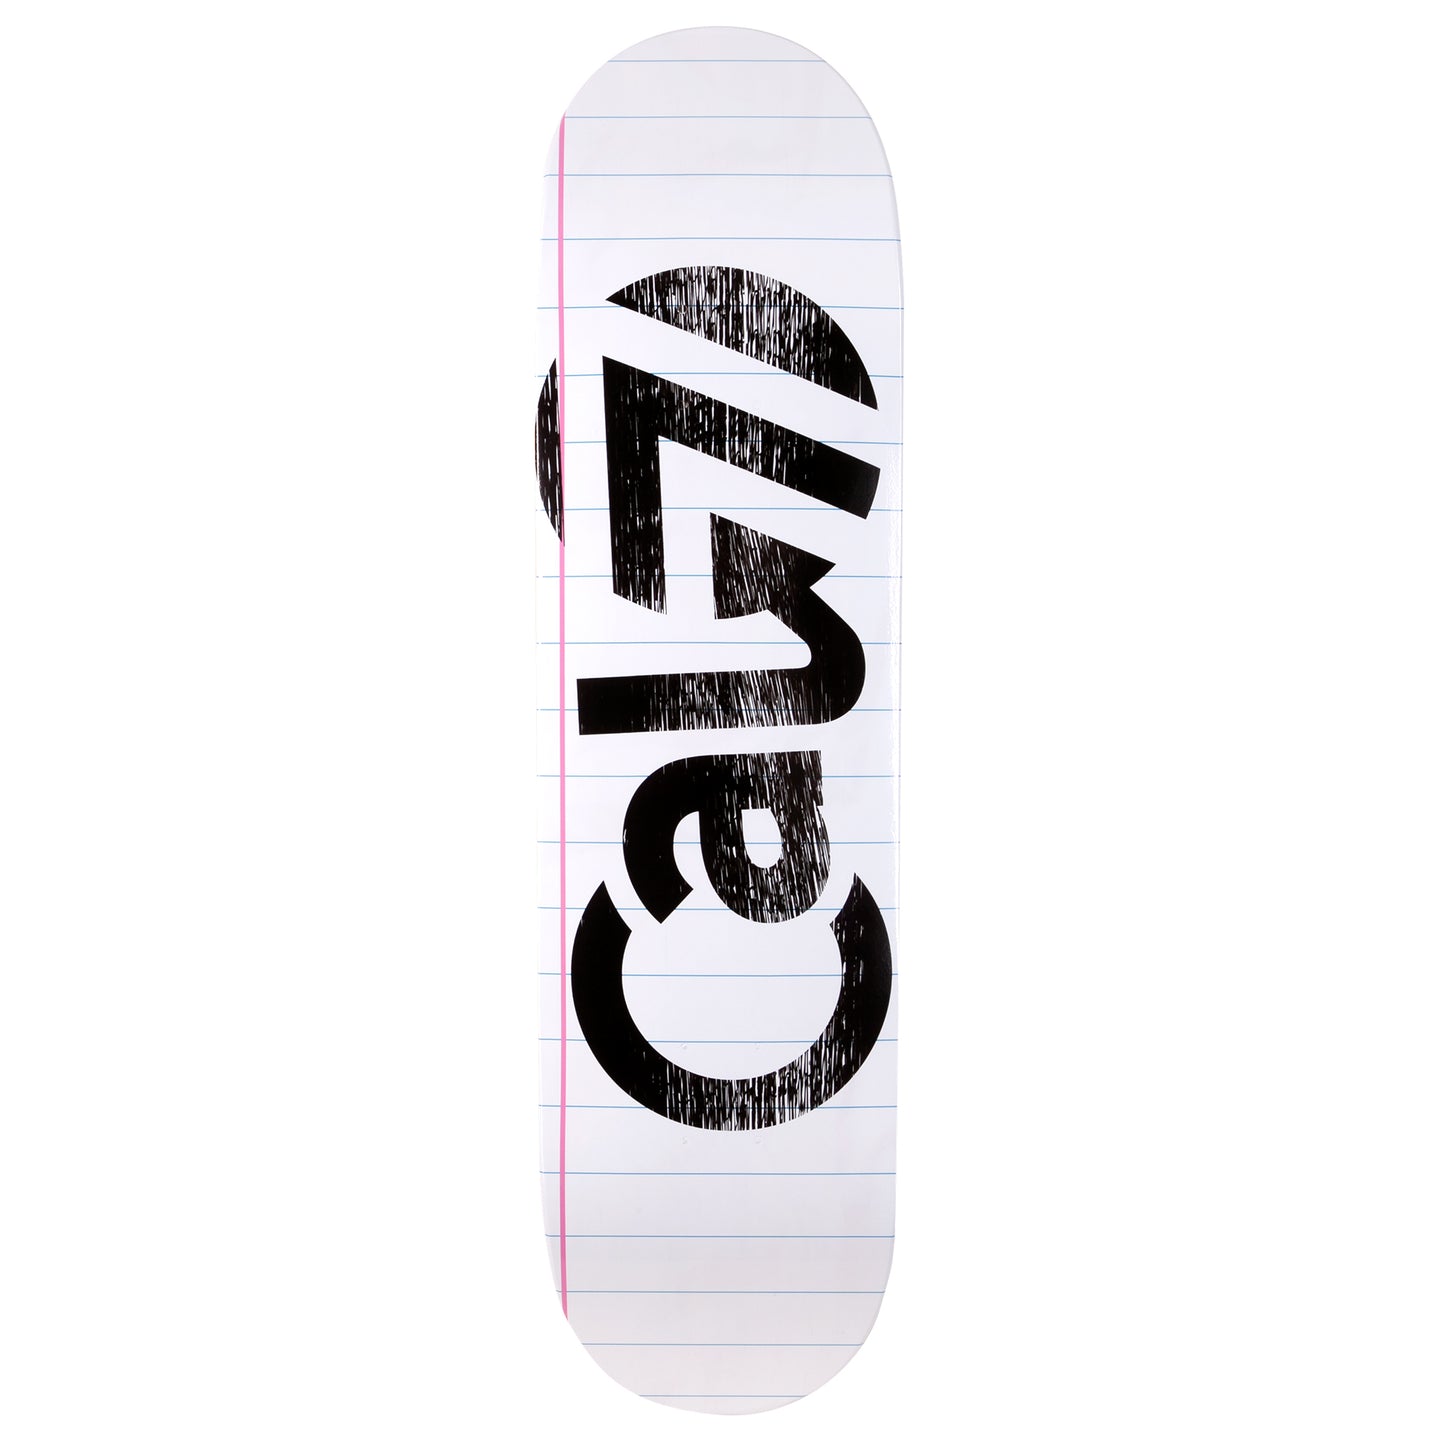 Cal 7 skateboard deck with lined paper sketch graphic